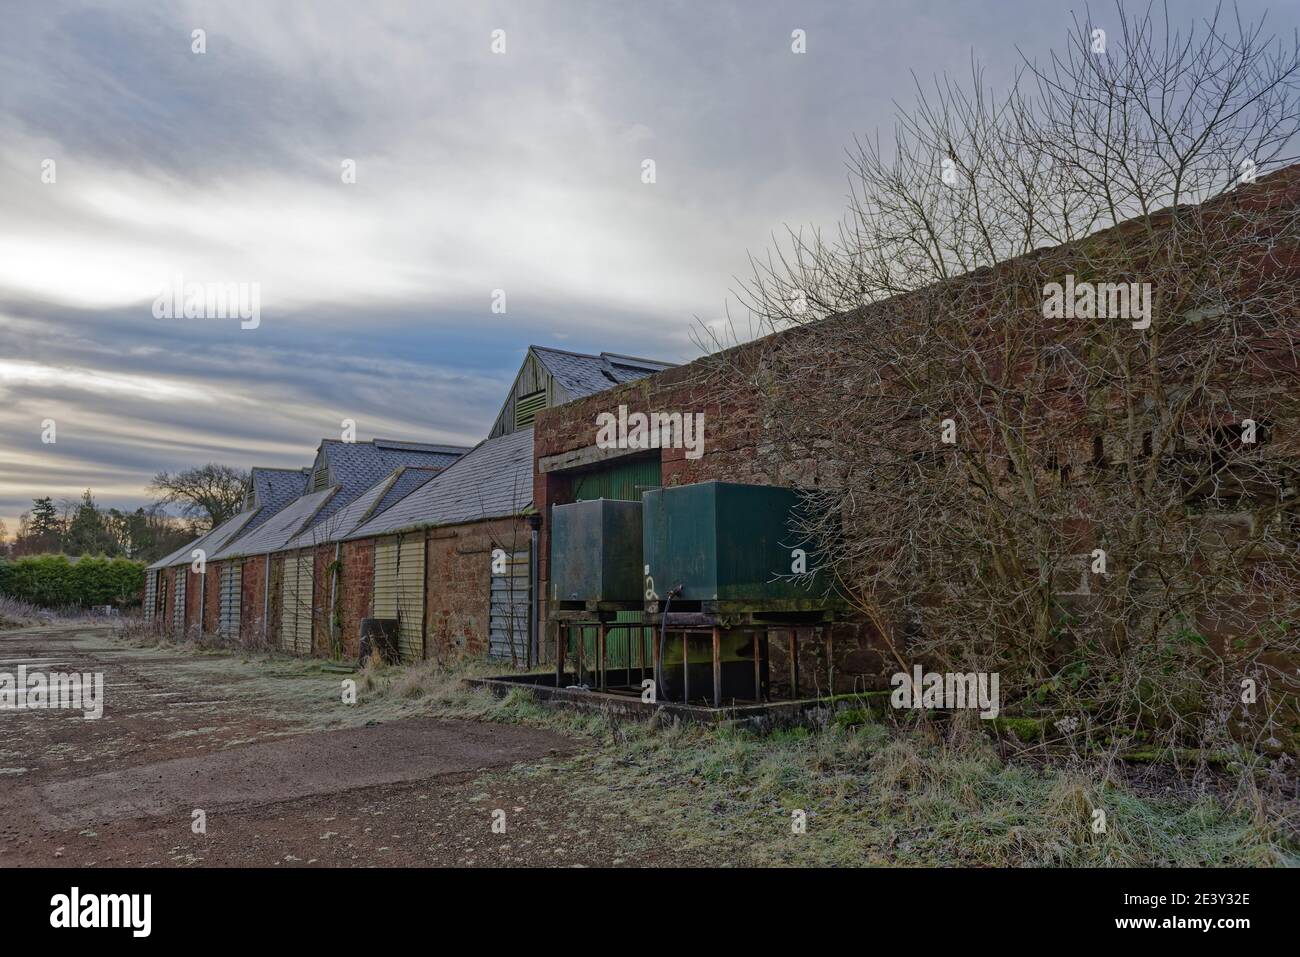 A ruined Farm Building or Agricultural Store with two empty Fuel Tanks beside one of the stone walls next to a metal sliding door. Stock Photo